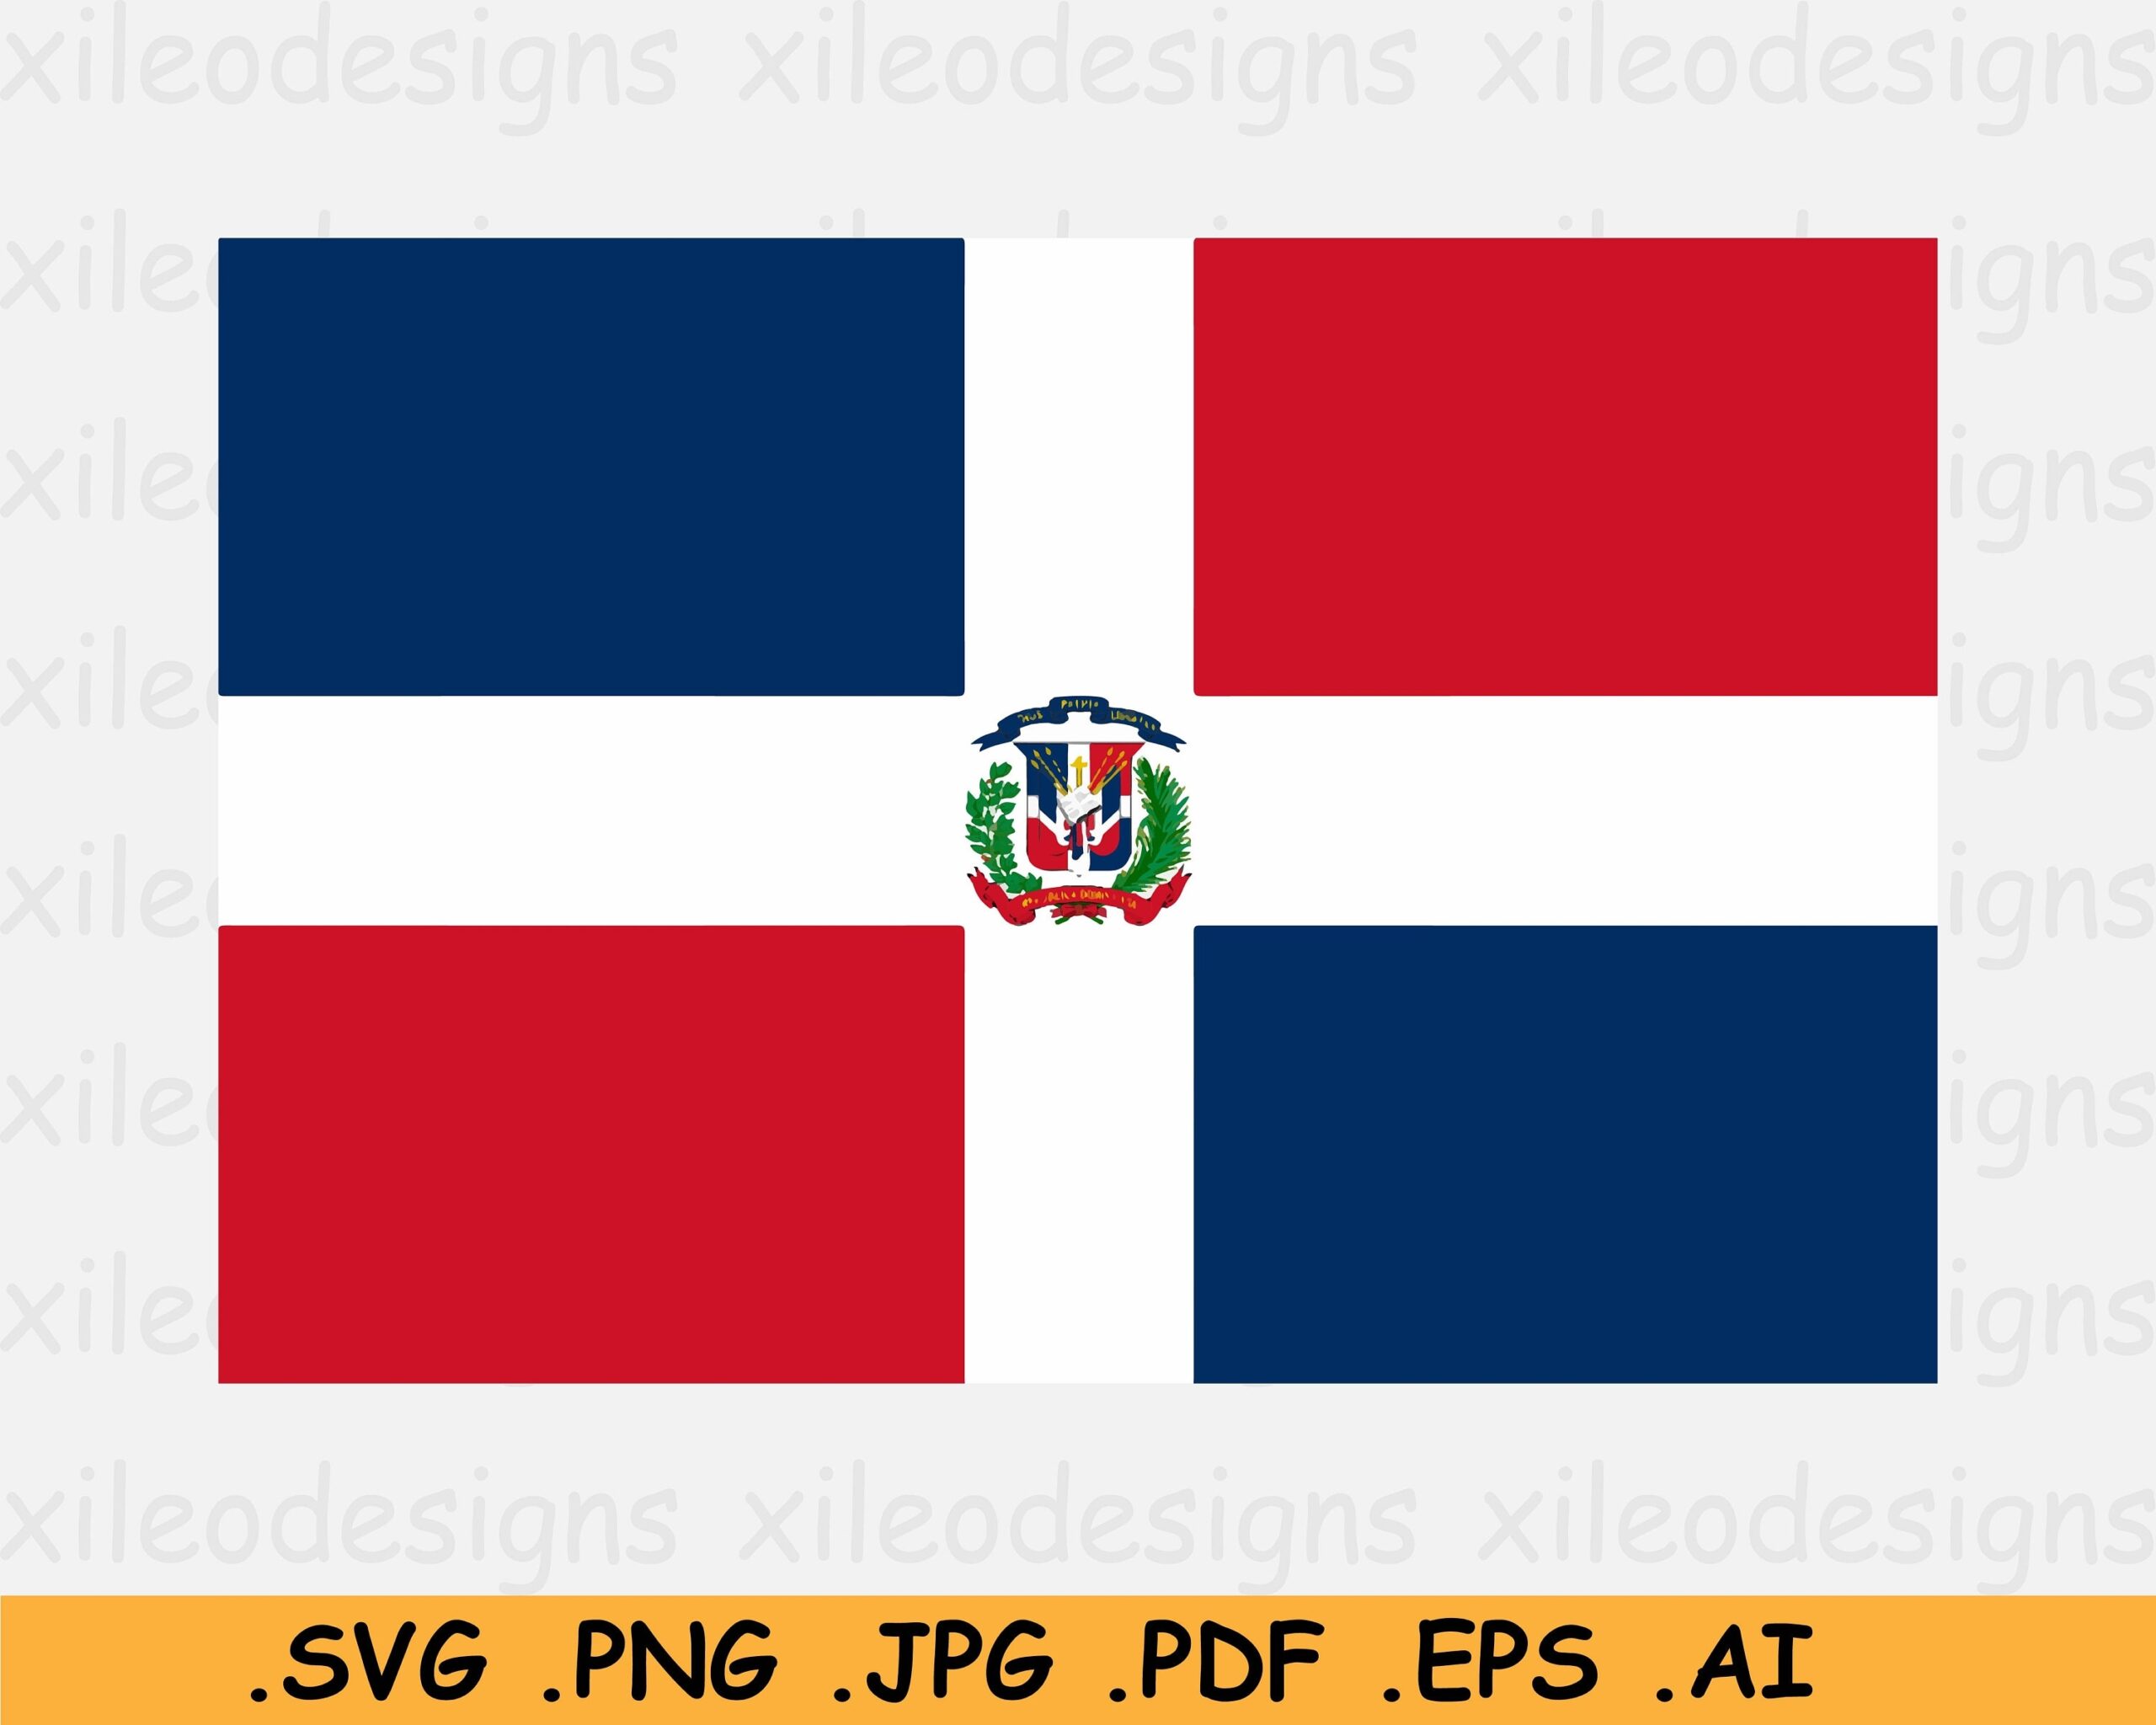 Dominican Republic National Flag SVG Nation Country Banner Instant Digital Download Clipart Icon Vector Graphic Svg Eps Ai Png Jpg Pdf Etsy